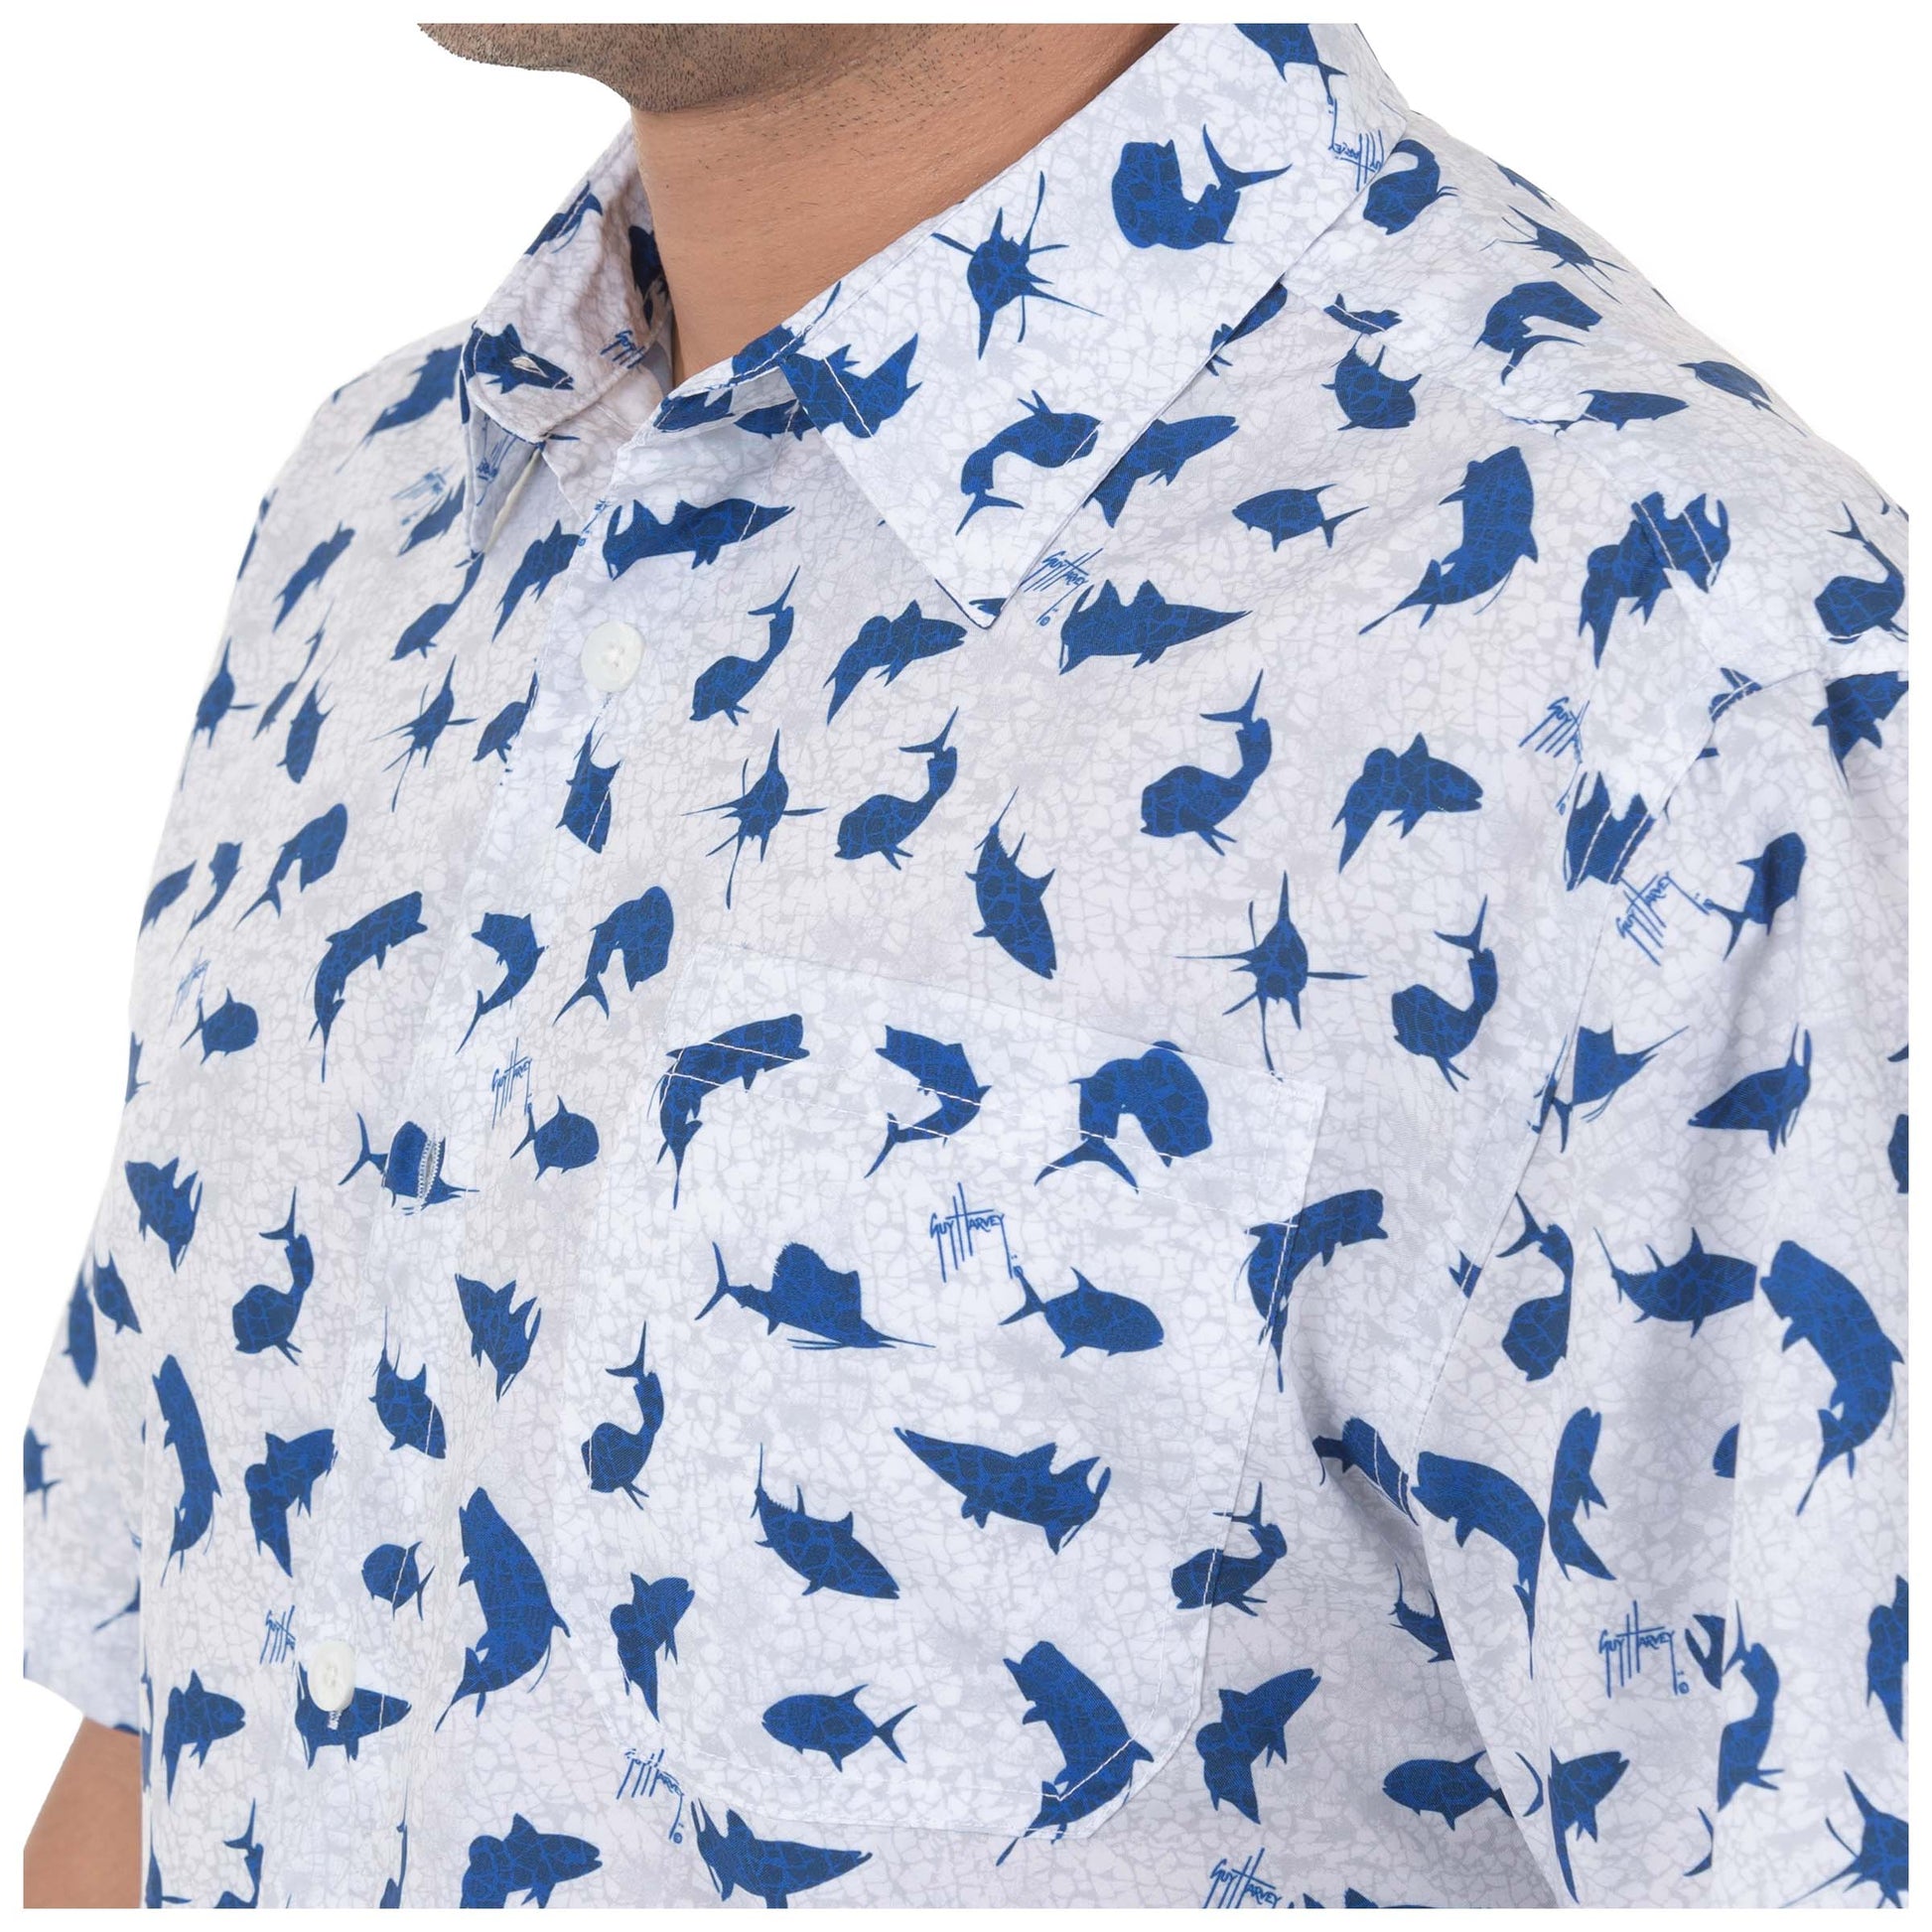 Men's Short Sleeve Space out Silos Printed Fishing Shirt View 2